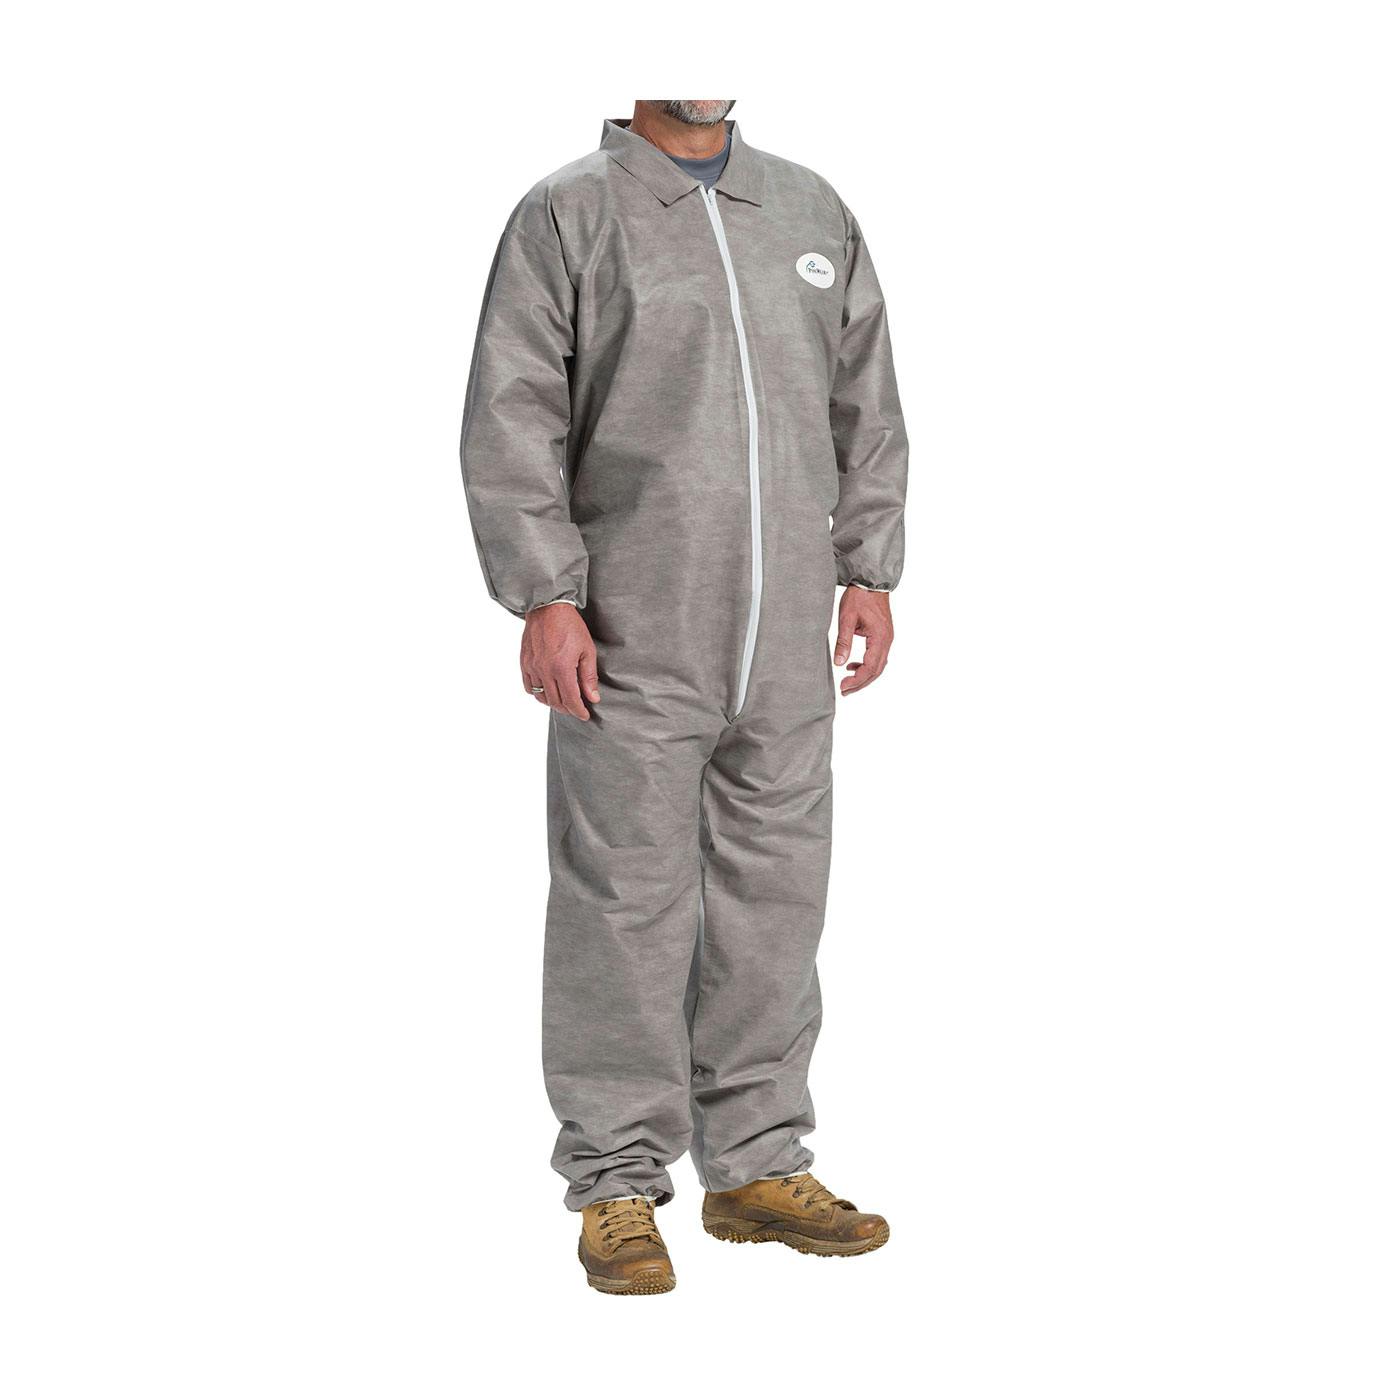 PosiWear M3 - Coverall with Elastic Wrist & Ankle 50 gsm, Gray (C3902)